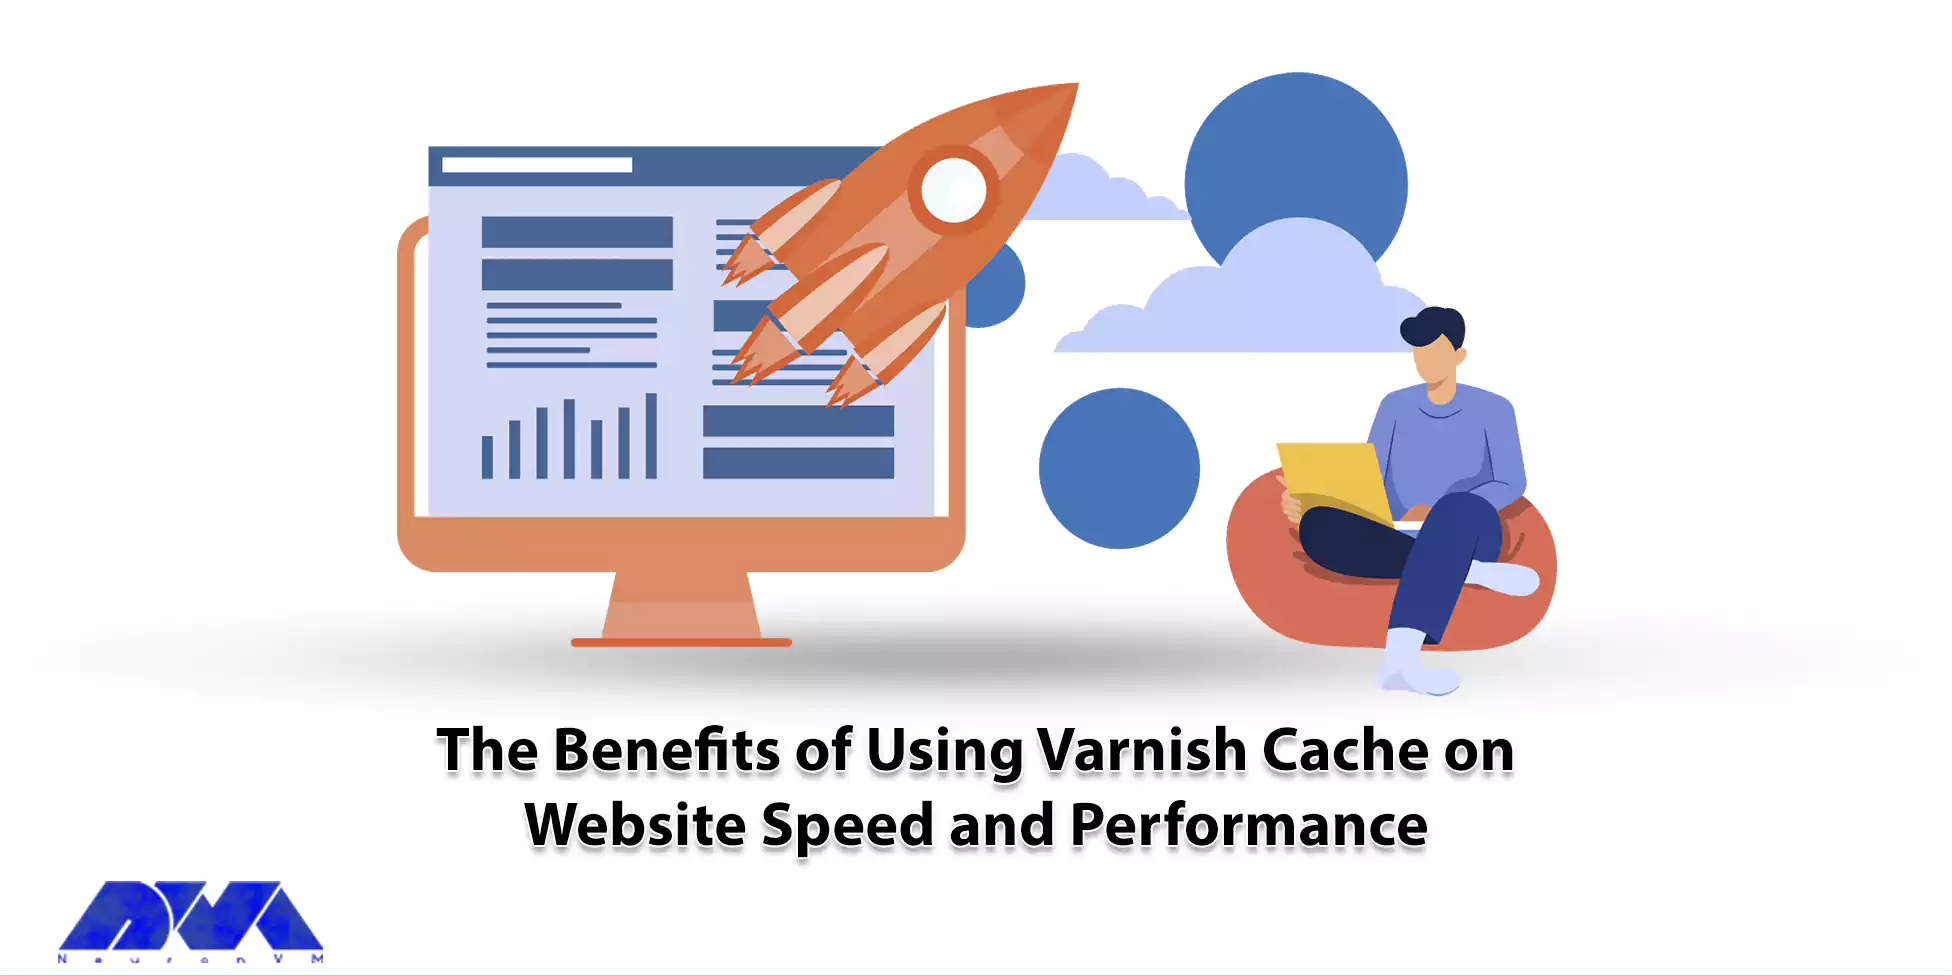 The Benefits of Using Varnish Cache on Website Speed and Performance